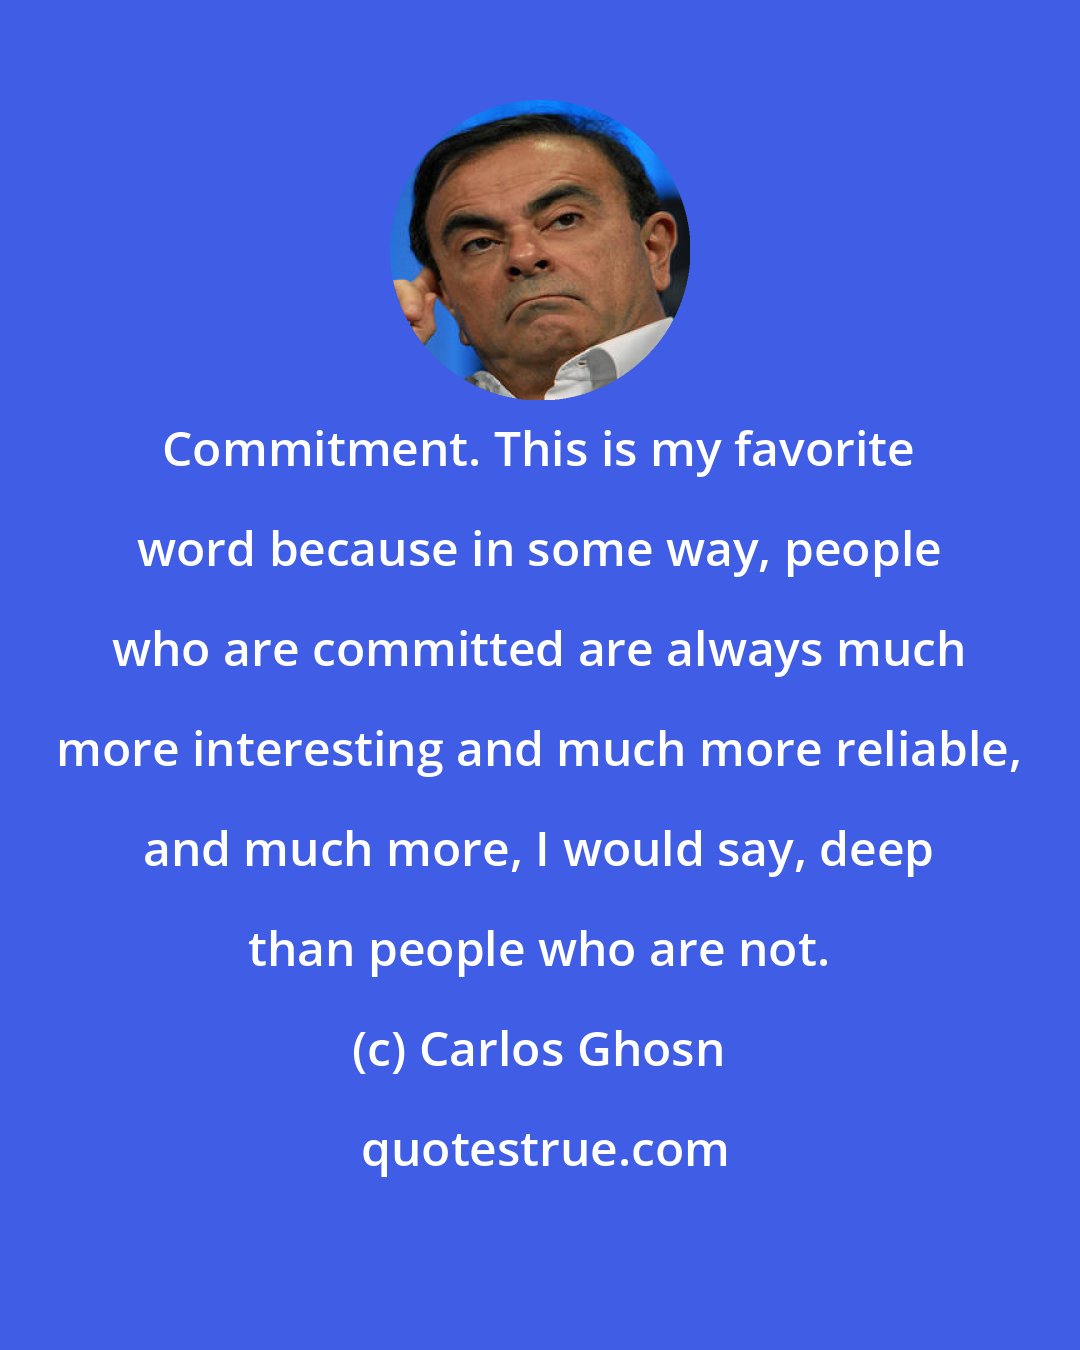 Carlos Ghosn: Commitment. This is my favorite word because in some way, people who are committed are always much more interesting and much more reliable, and much more, I would say, deep than people who are not.